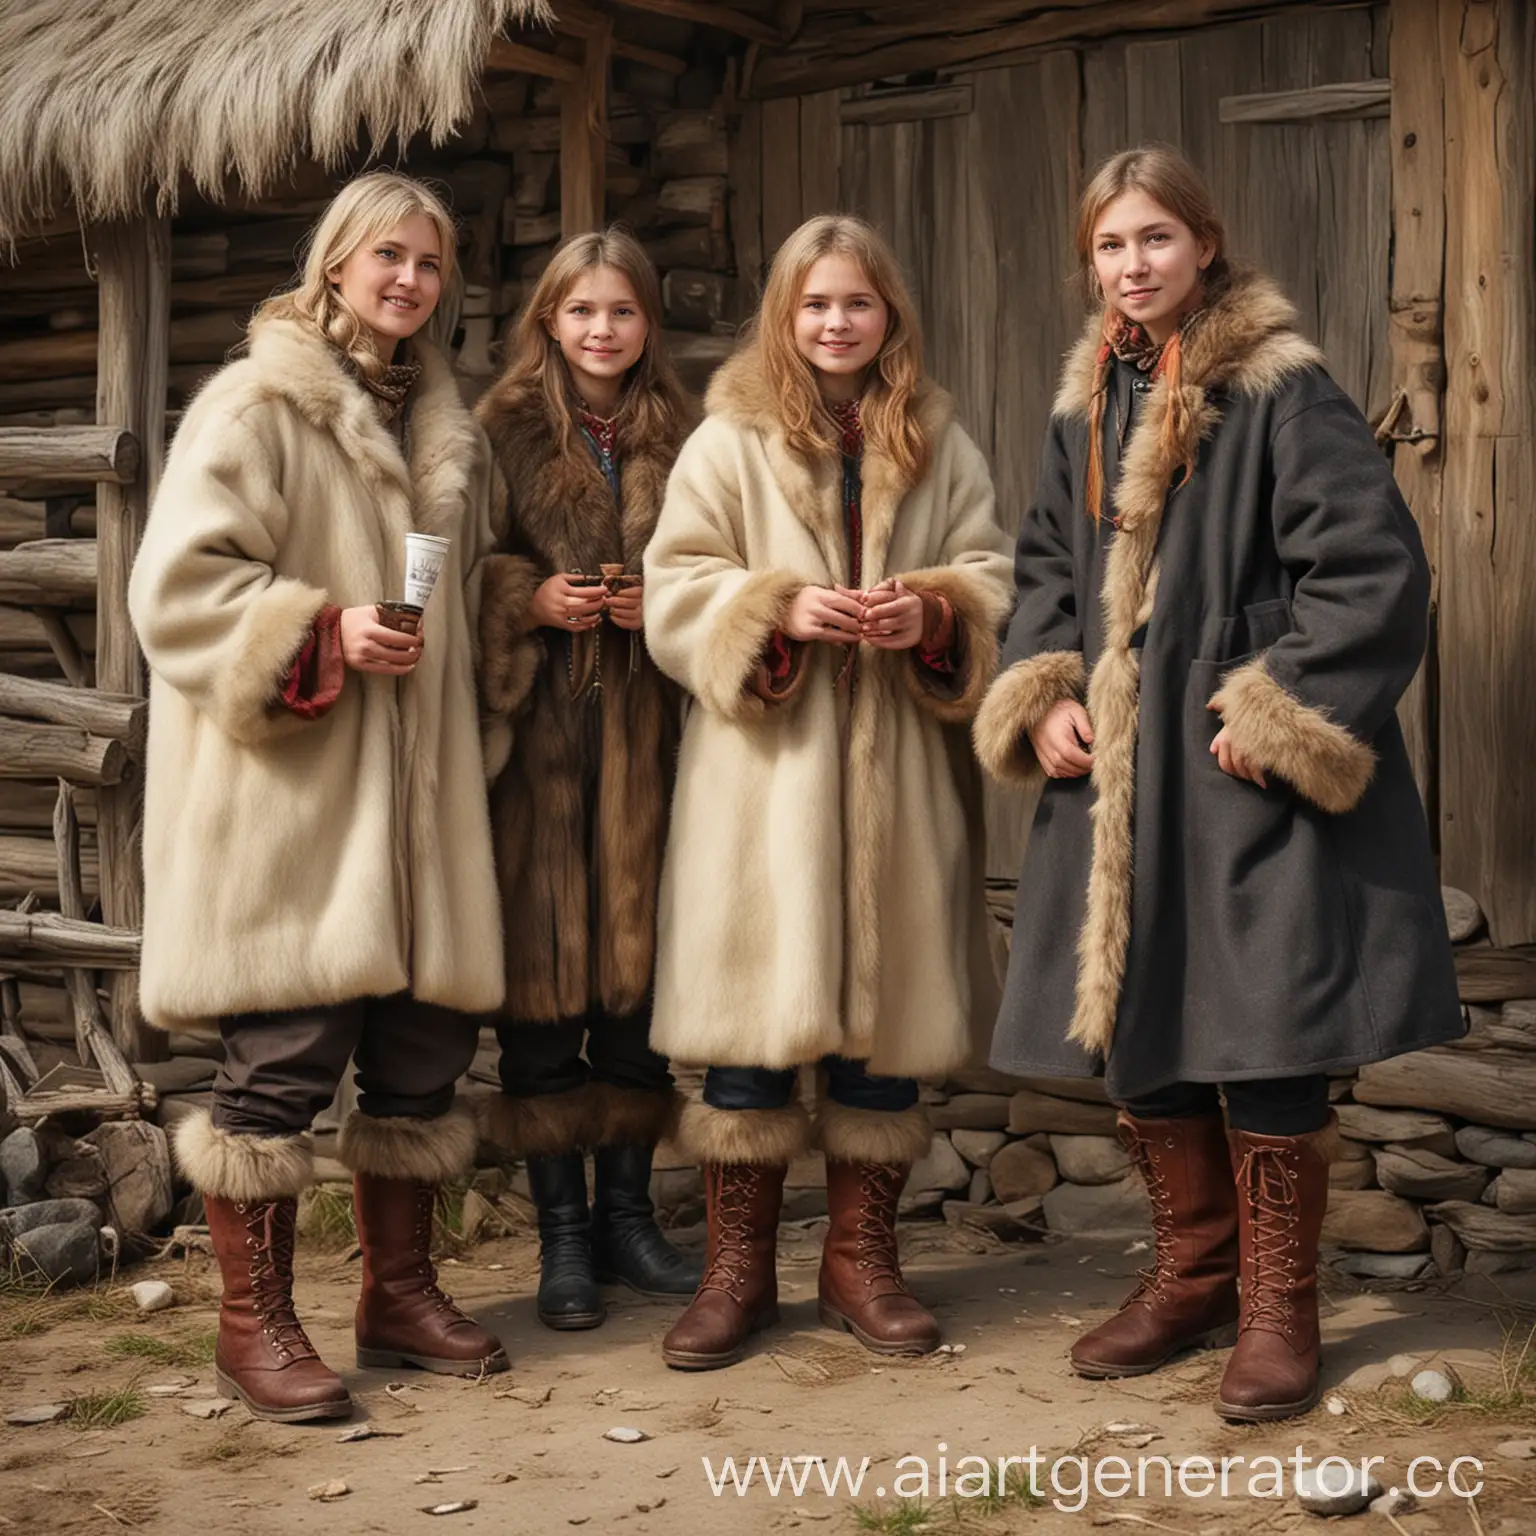 Friendly-Siberian-Villagers-in-Traditional-Attire-Collaborating-in-the-Snowy-Village